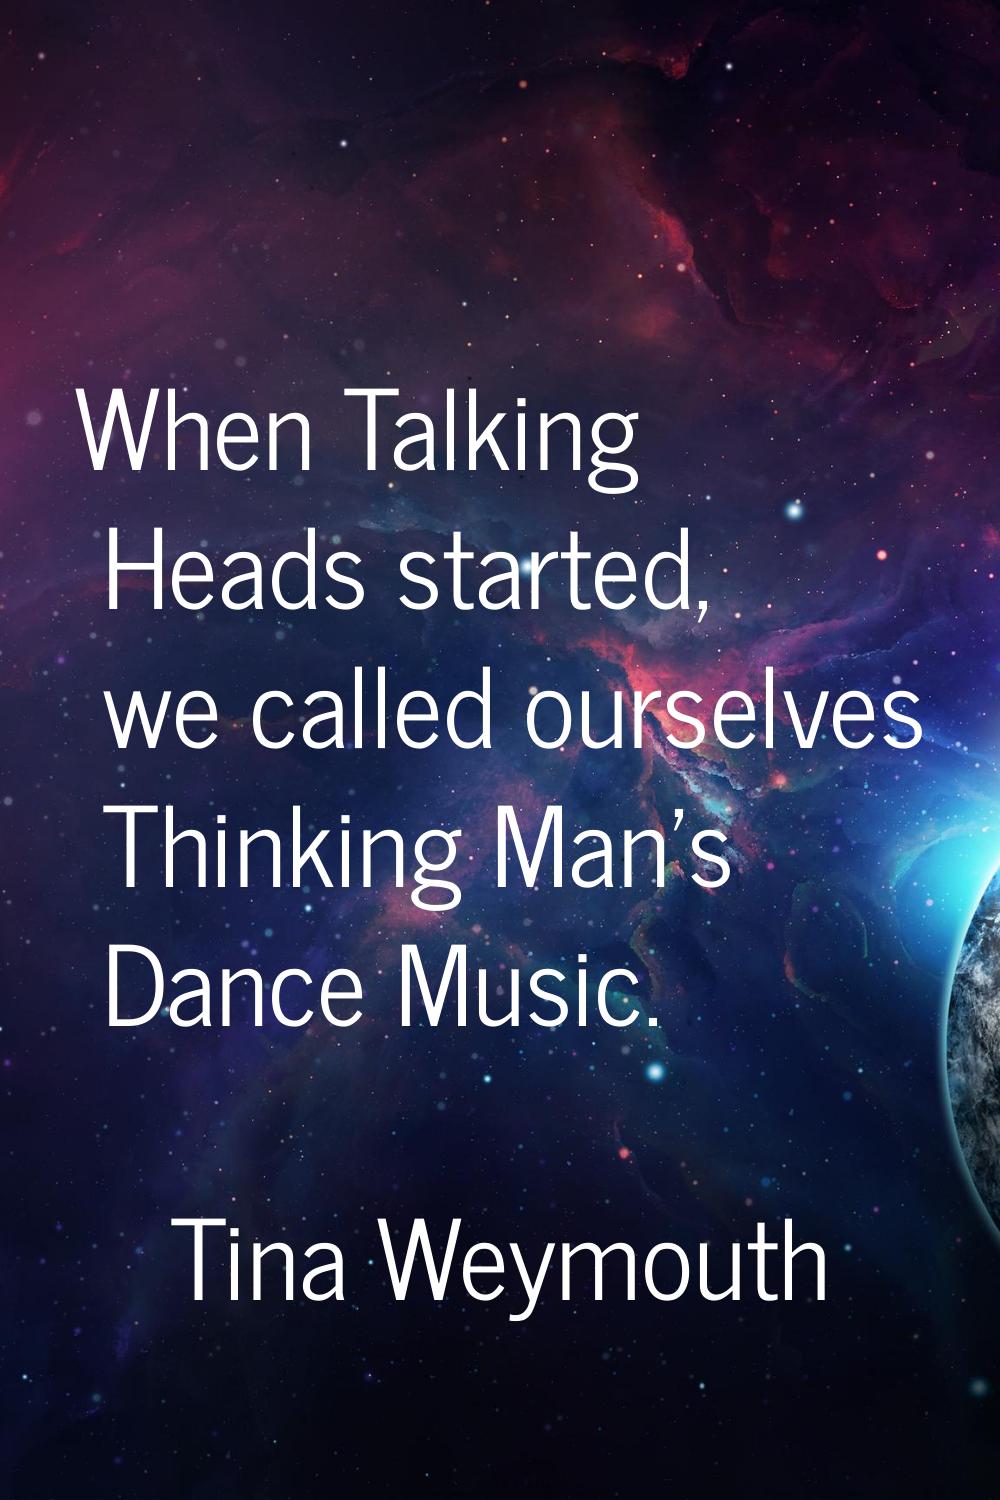 When Talking Heads started, we called ourselves Thinking Man's Dance Music.